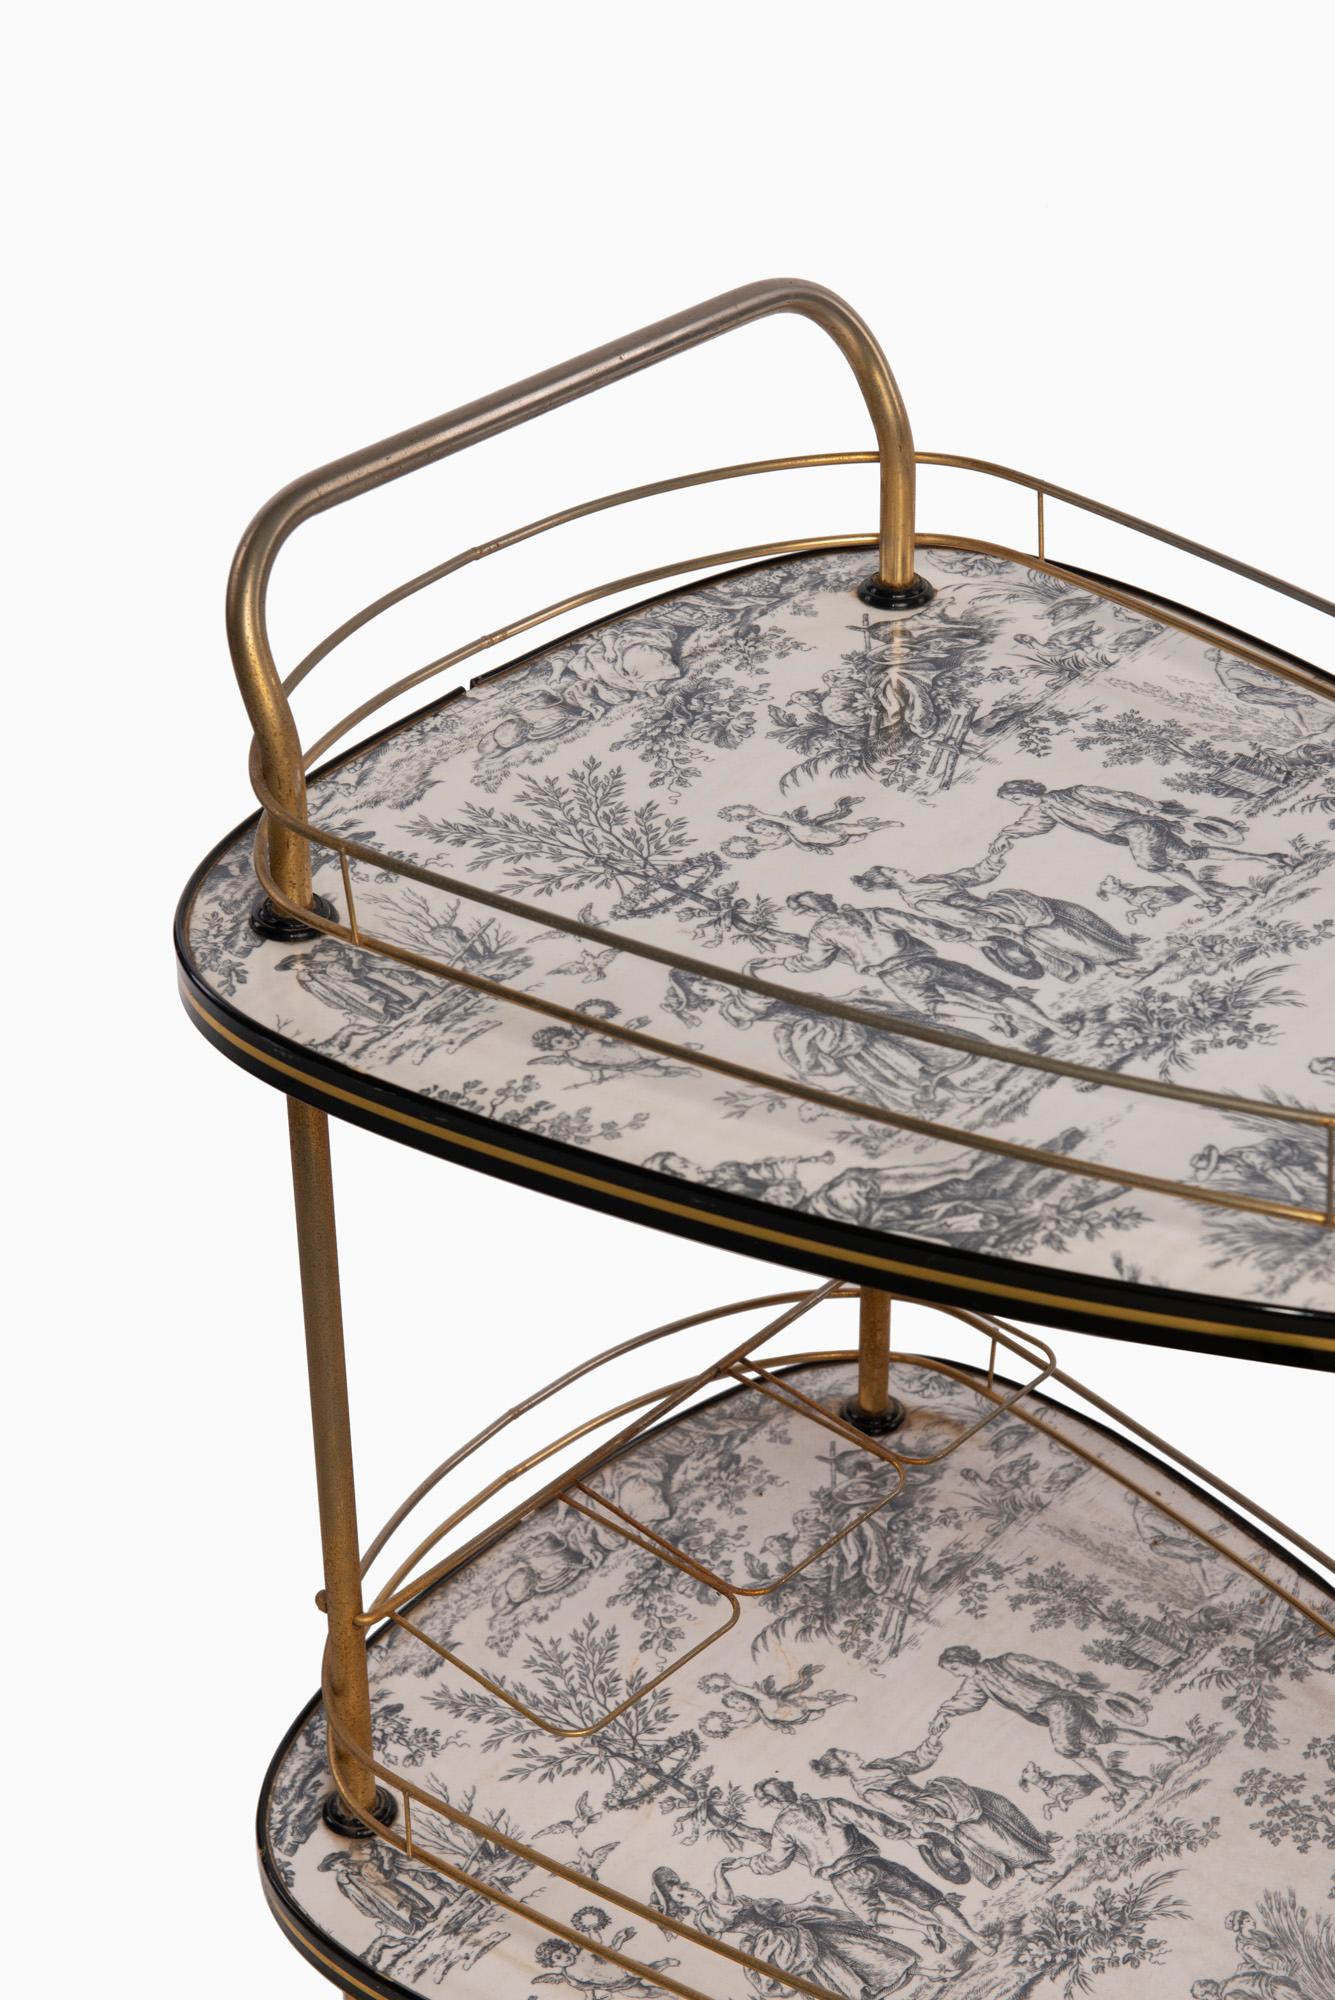  20th-century French toile de Jouie bar cart, 1960, metal and Formica toile de jouie decor. Good conditions. NOTICE: DUE TO THE CURRENT  COVID-19 SITUATION, THE SHIPPING OF ITEMS MAY BE SLIGHTLY DELAYED. HOWEVER, ALL OF OUR ITEMS ARE AVAILABLE, WE